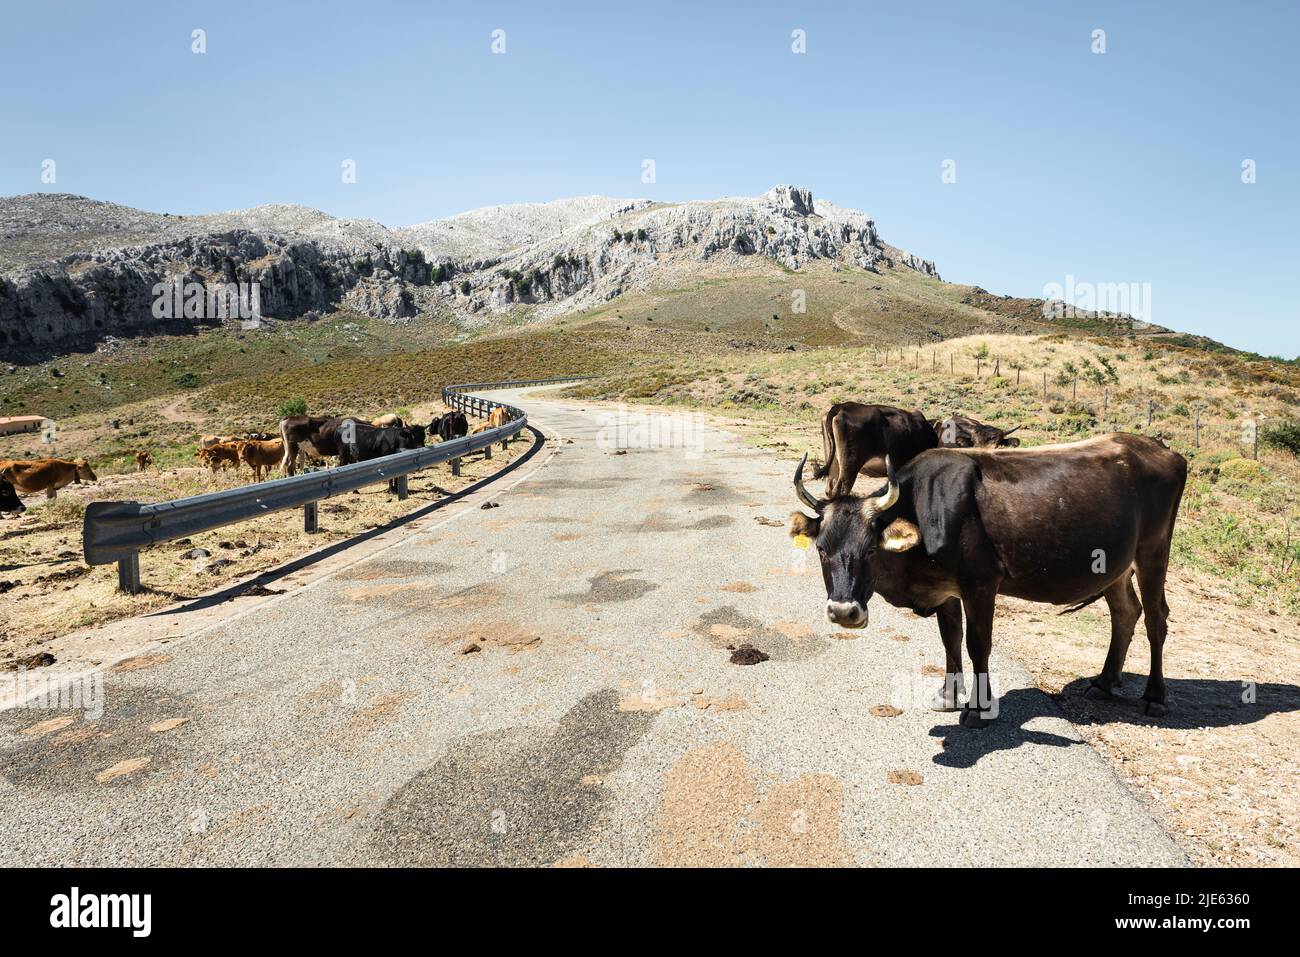 Cows standing in the midday sun on the road along the wild, karst mountain range of Monte Albo, Baronia, Sardinia,Italy Stock Photo